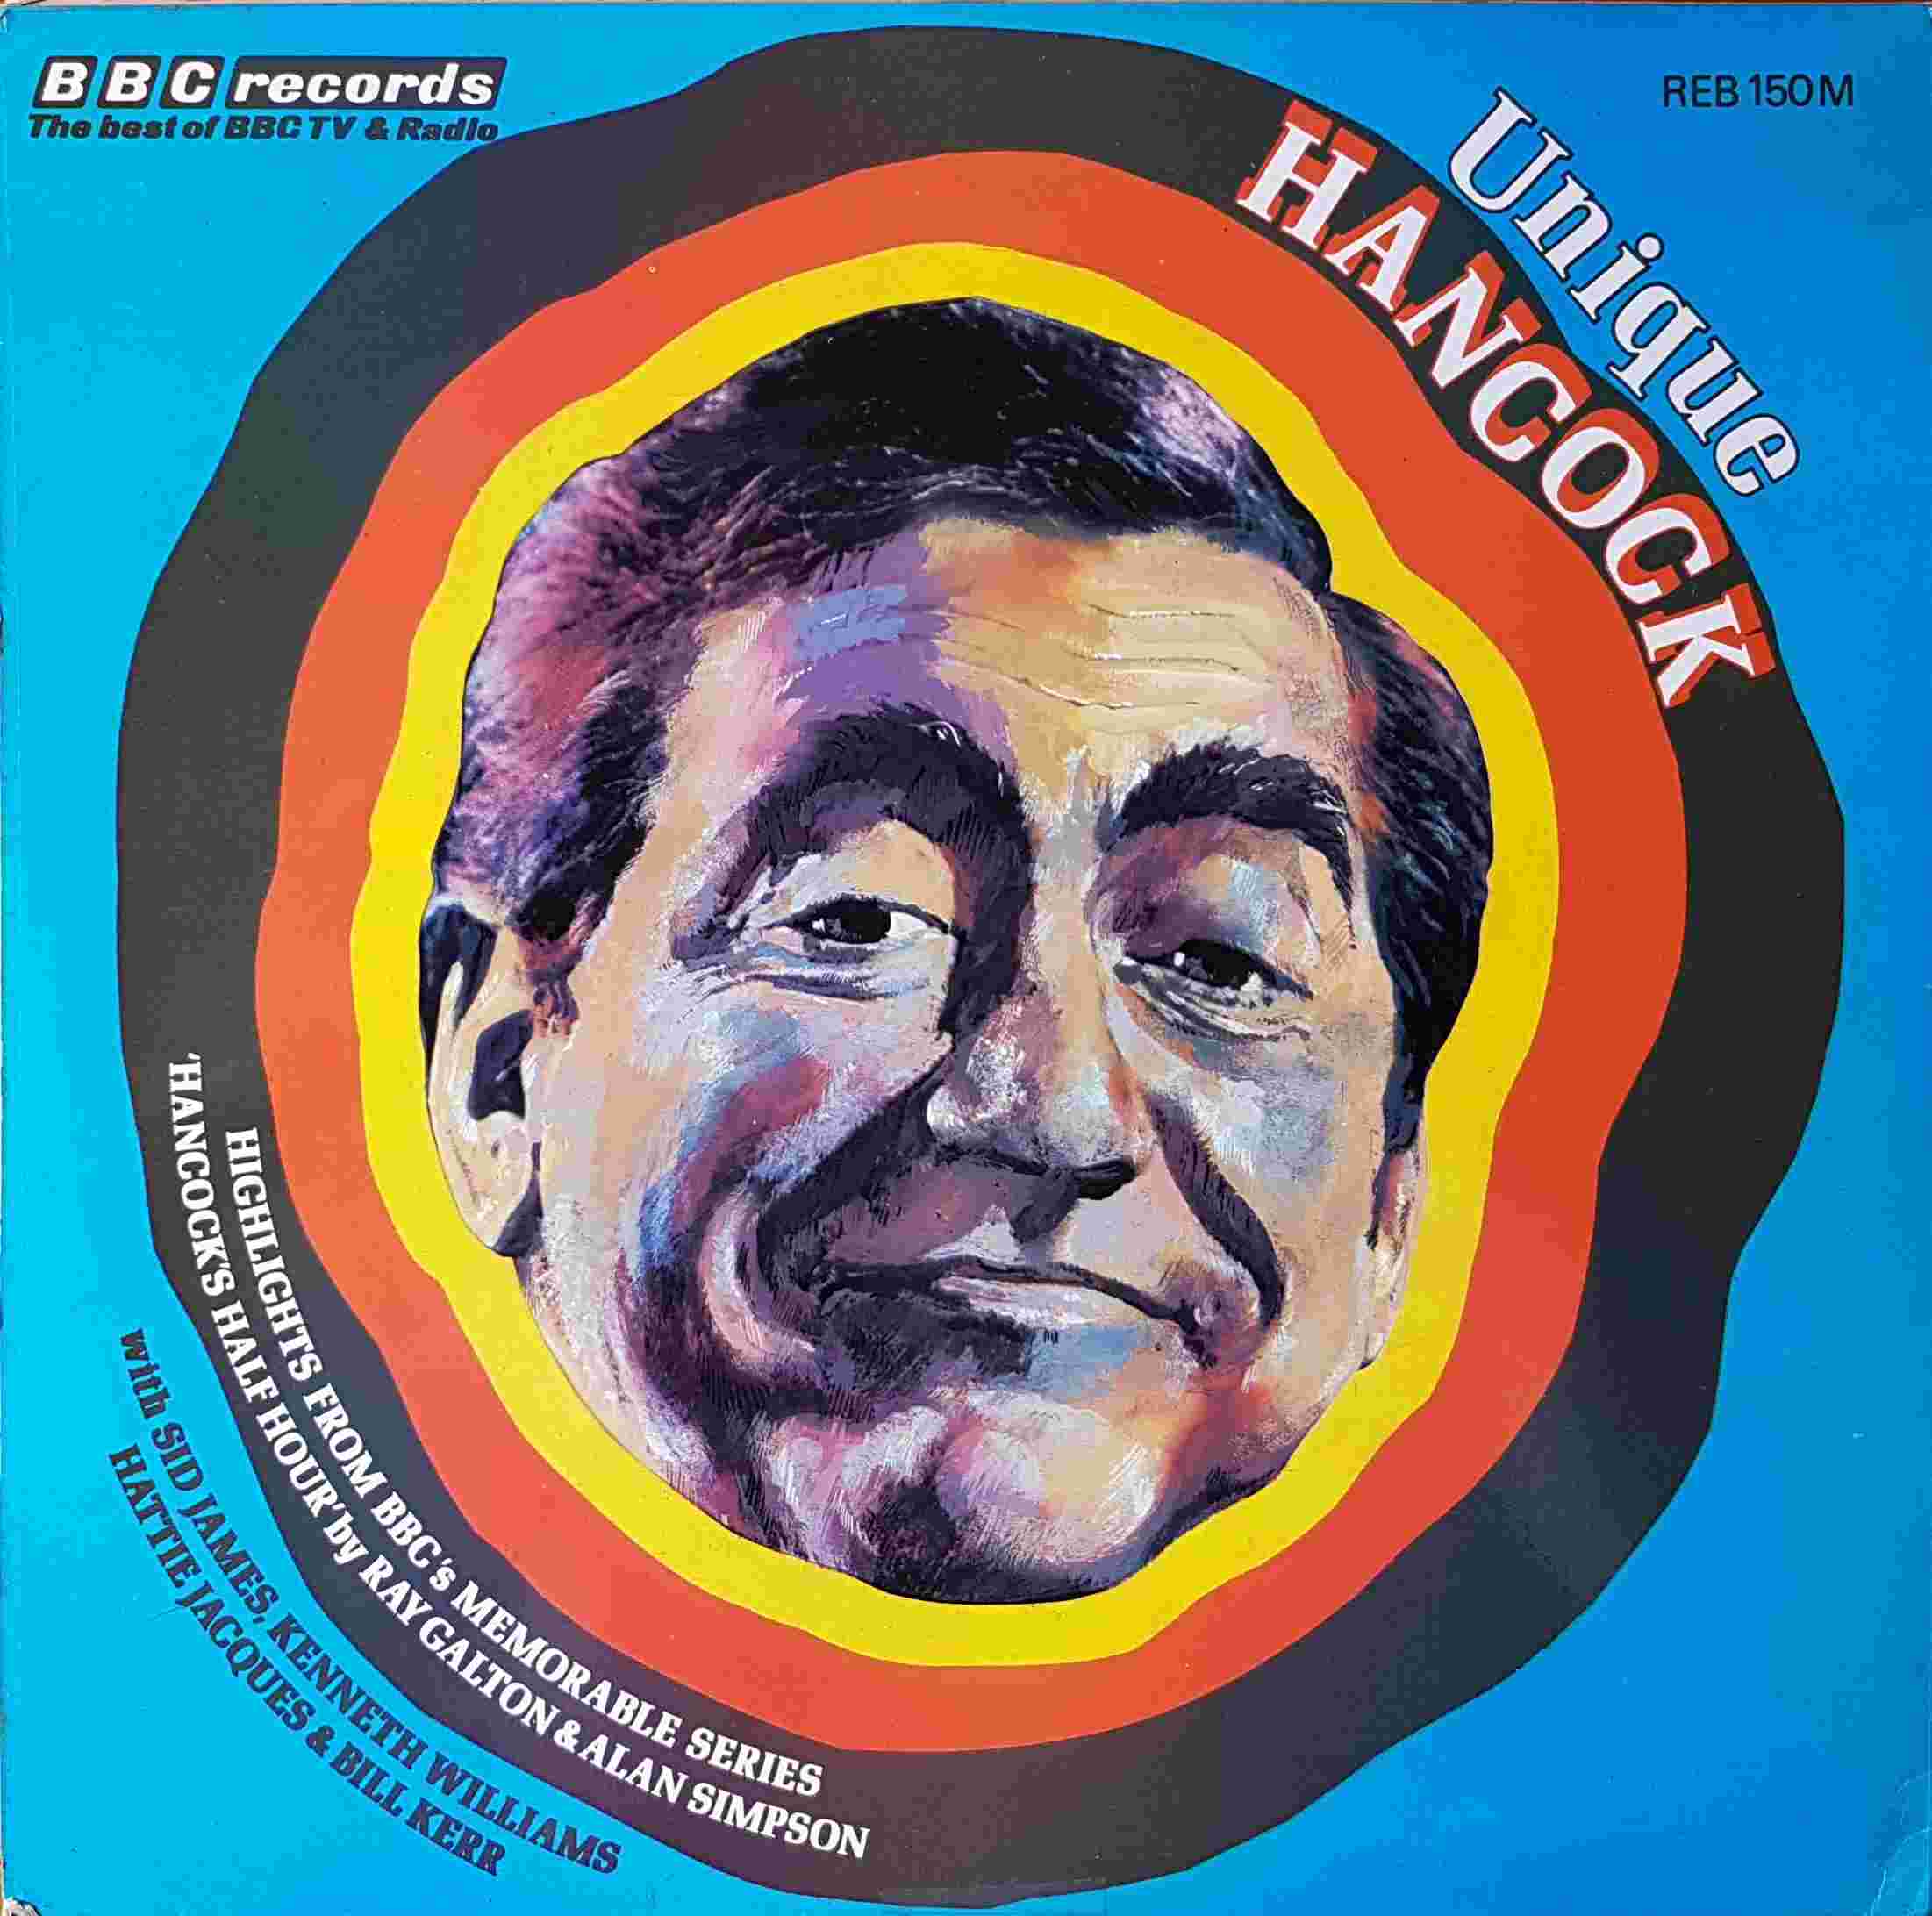 Picture of REB 150 Unique Hancock by artist Tony Hancock from the BBC records and Tapes library